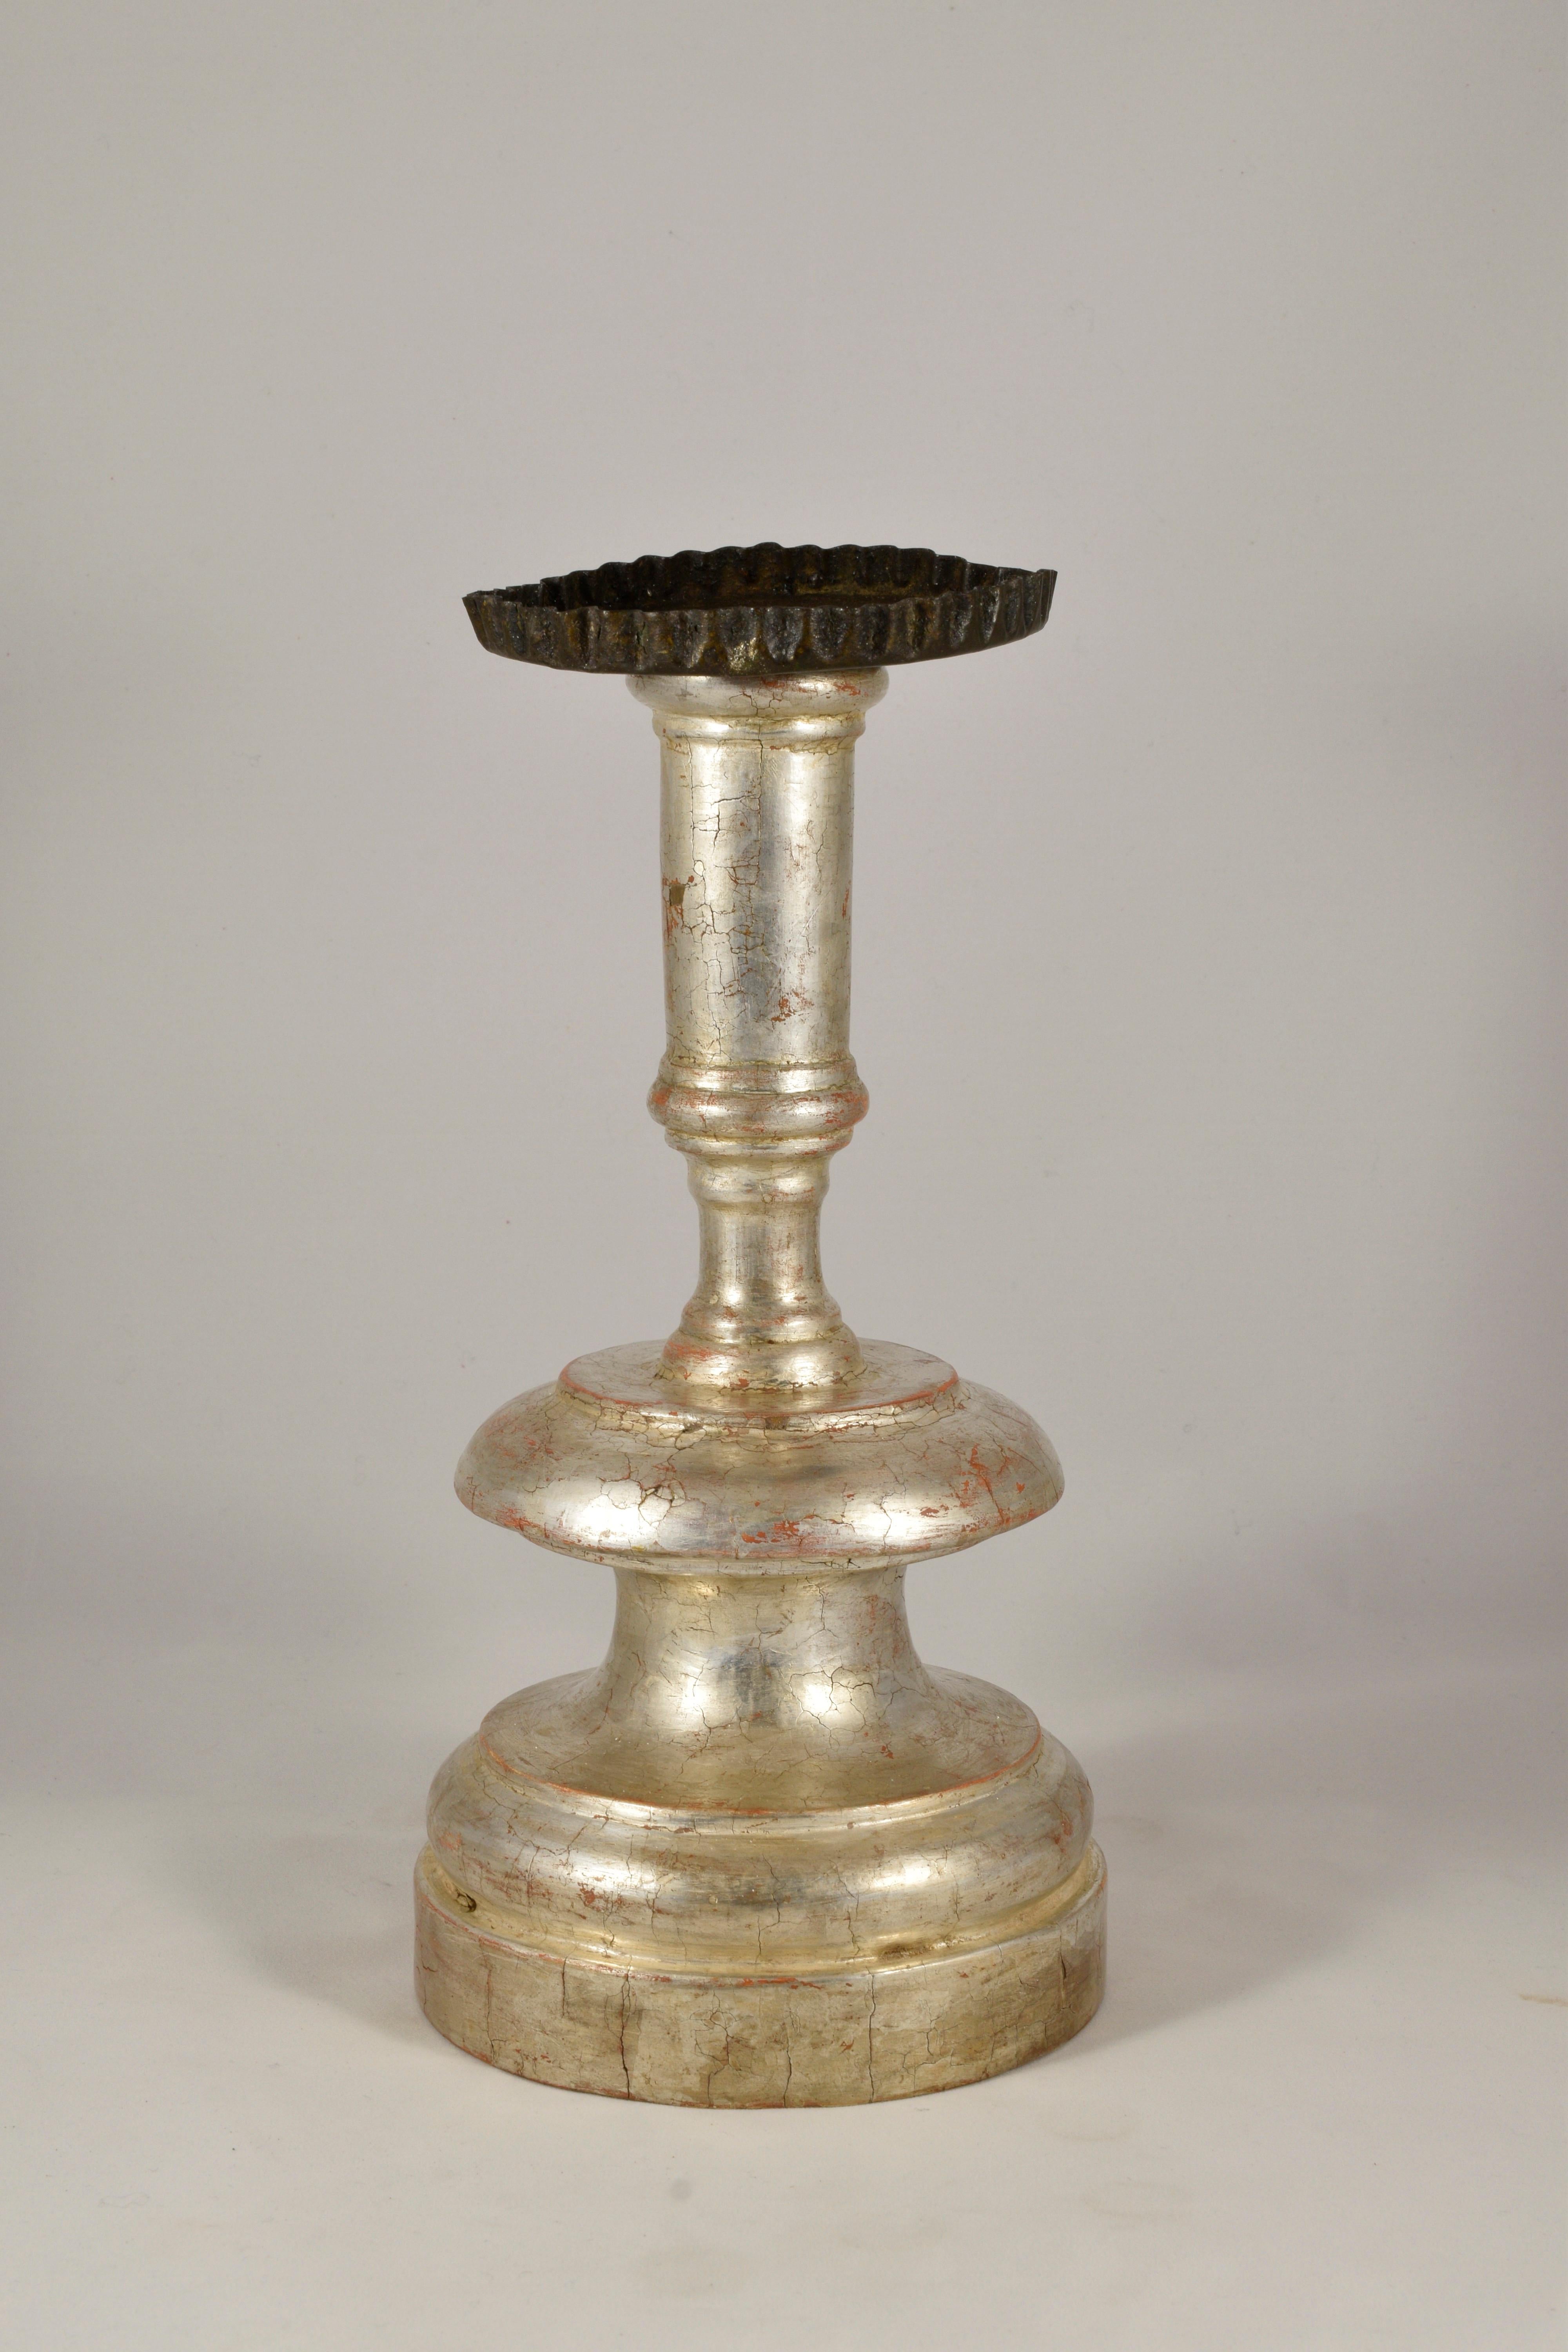 Italy, Firenze, late 17th century
Simple but elegant typical Florentine candlestick.
It has cracks and small lacks of the pinstripe typical of high-epoch items.